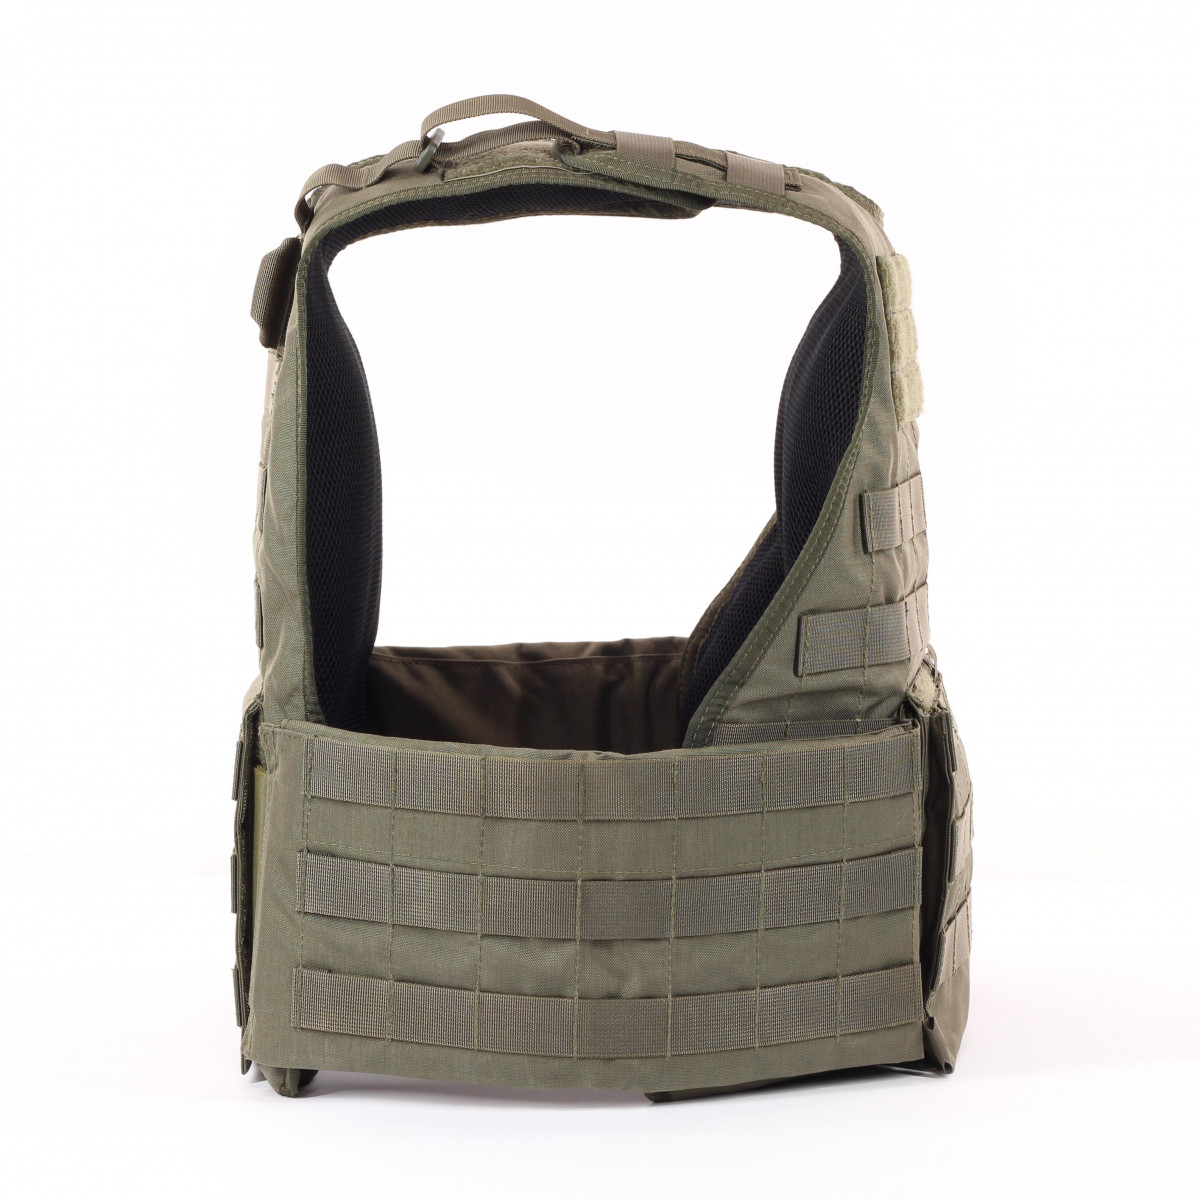 Plate carrier vest ARES in stone gray-olive